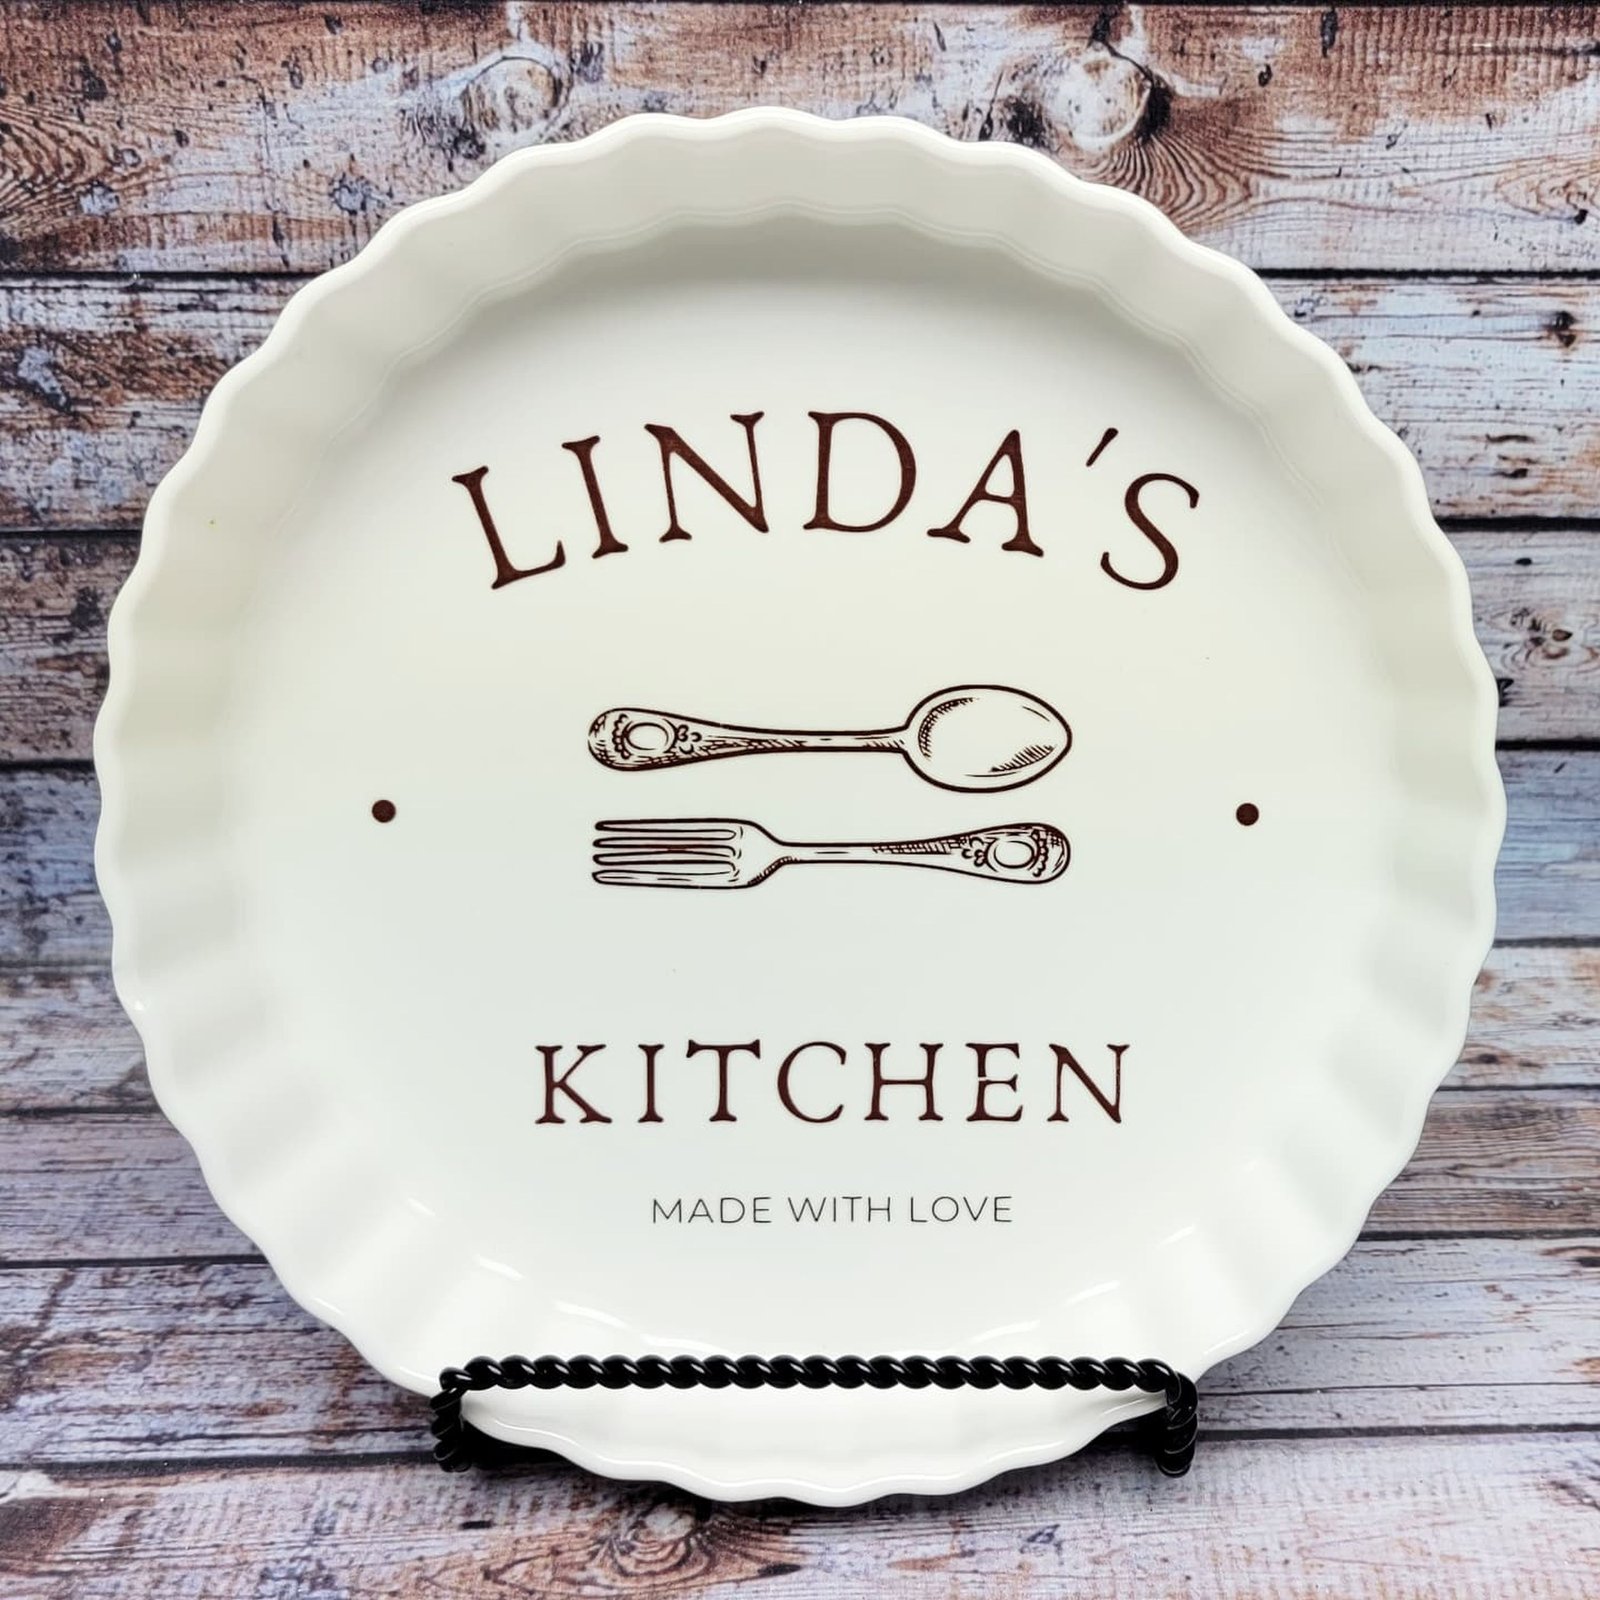 Delightful Stoneware Personalized Pie Dish - Life Is Sweet at